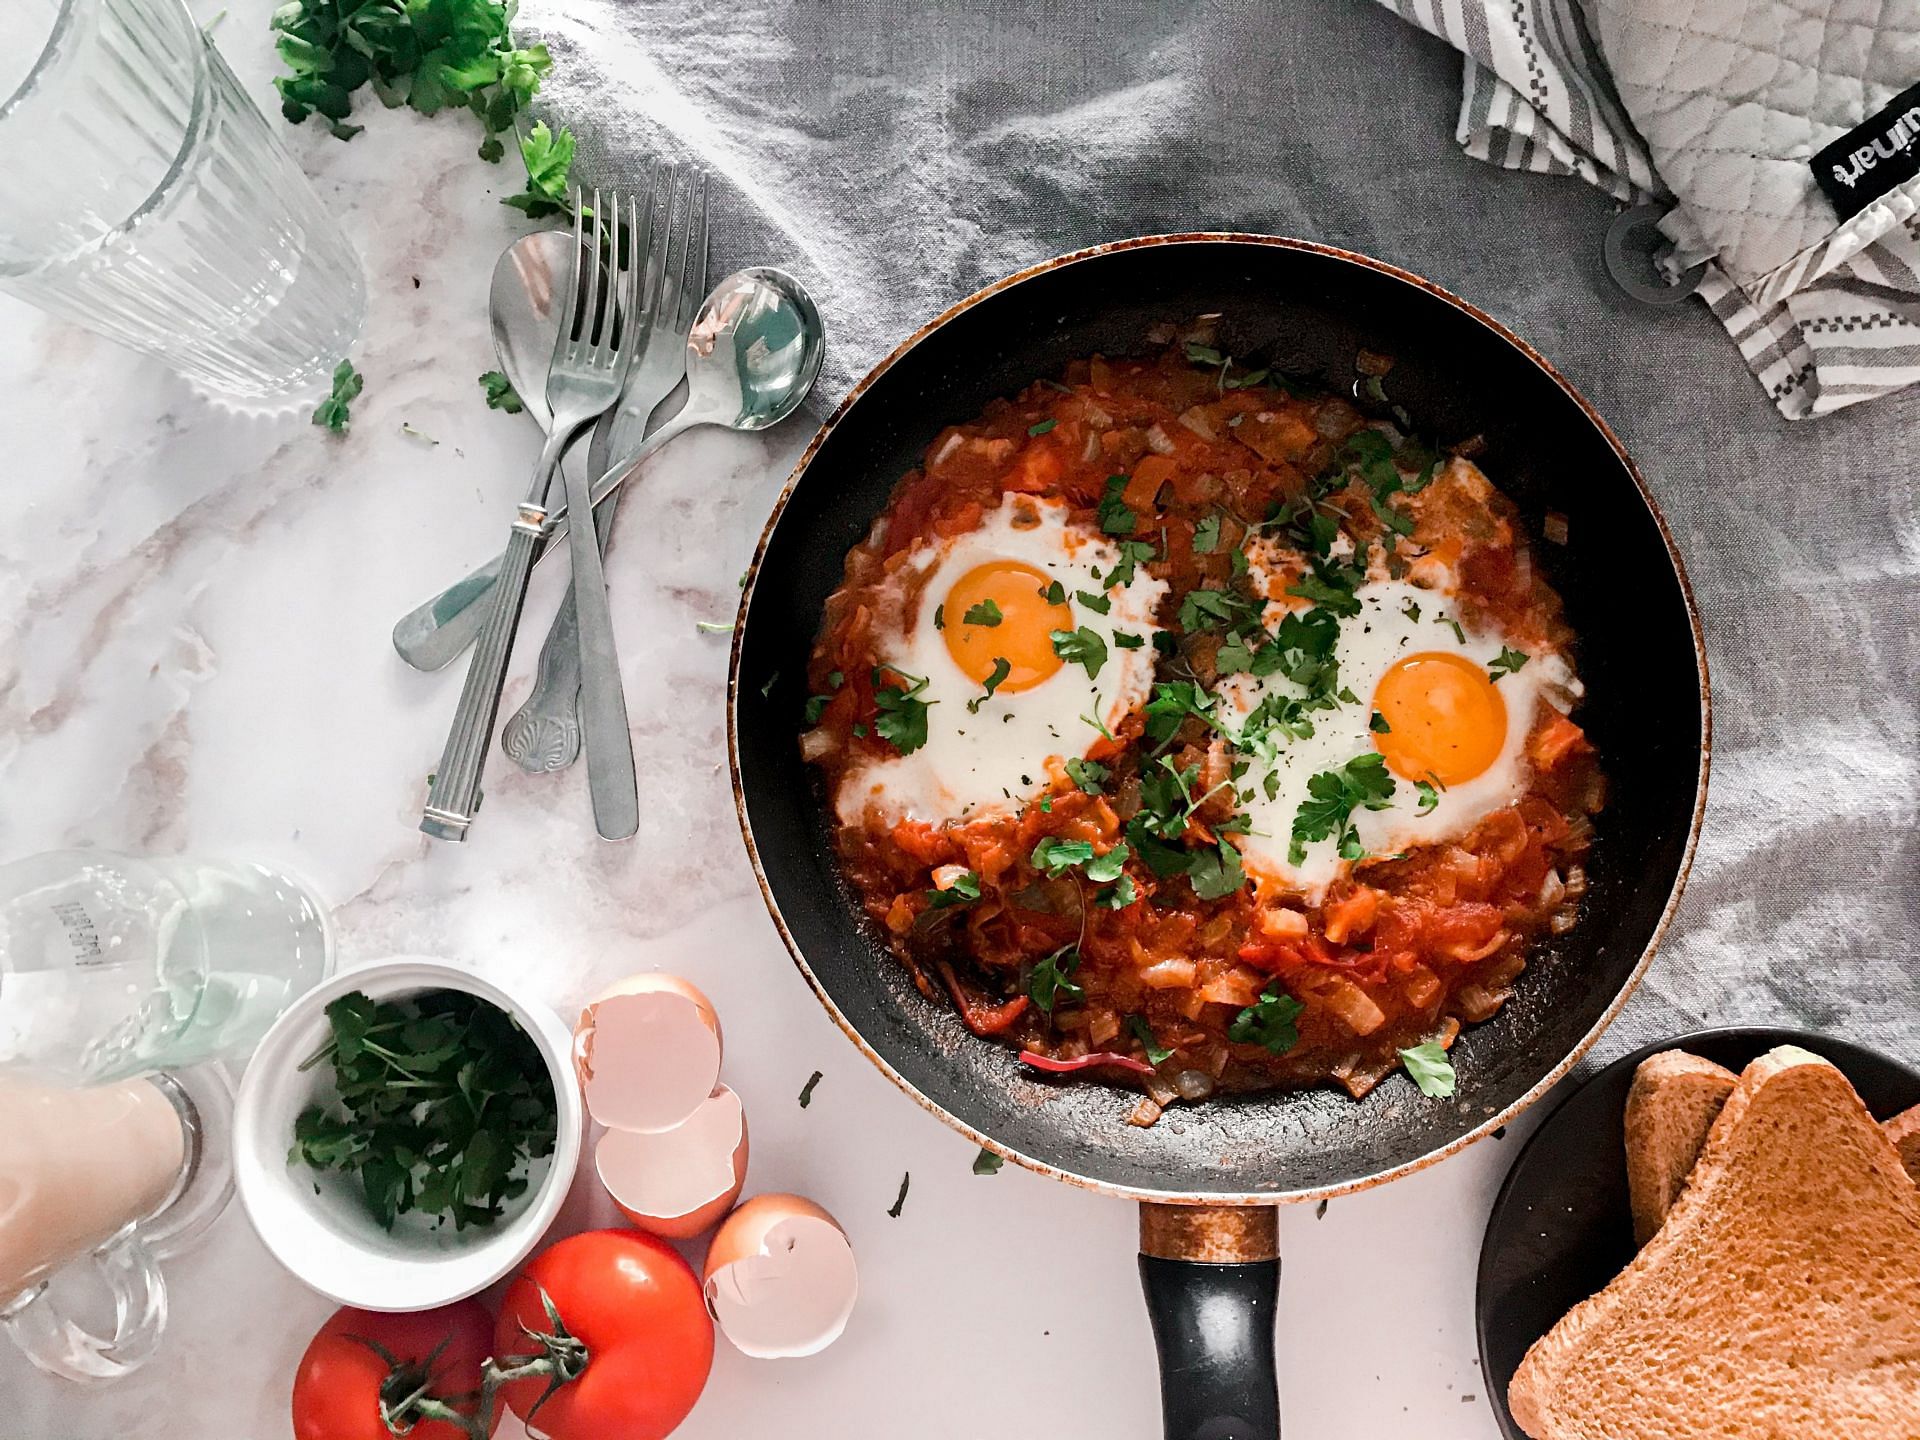 Trying different egg recipes can be fun. (Image via Unsplash / Manny NB)